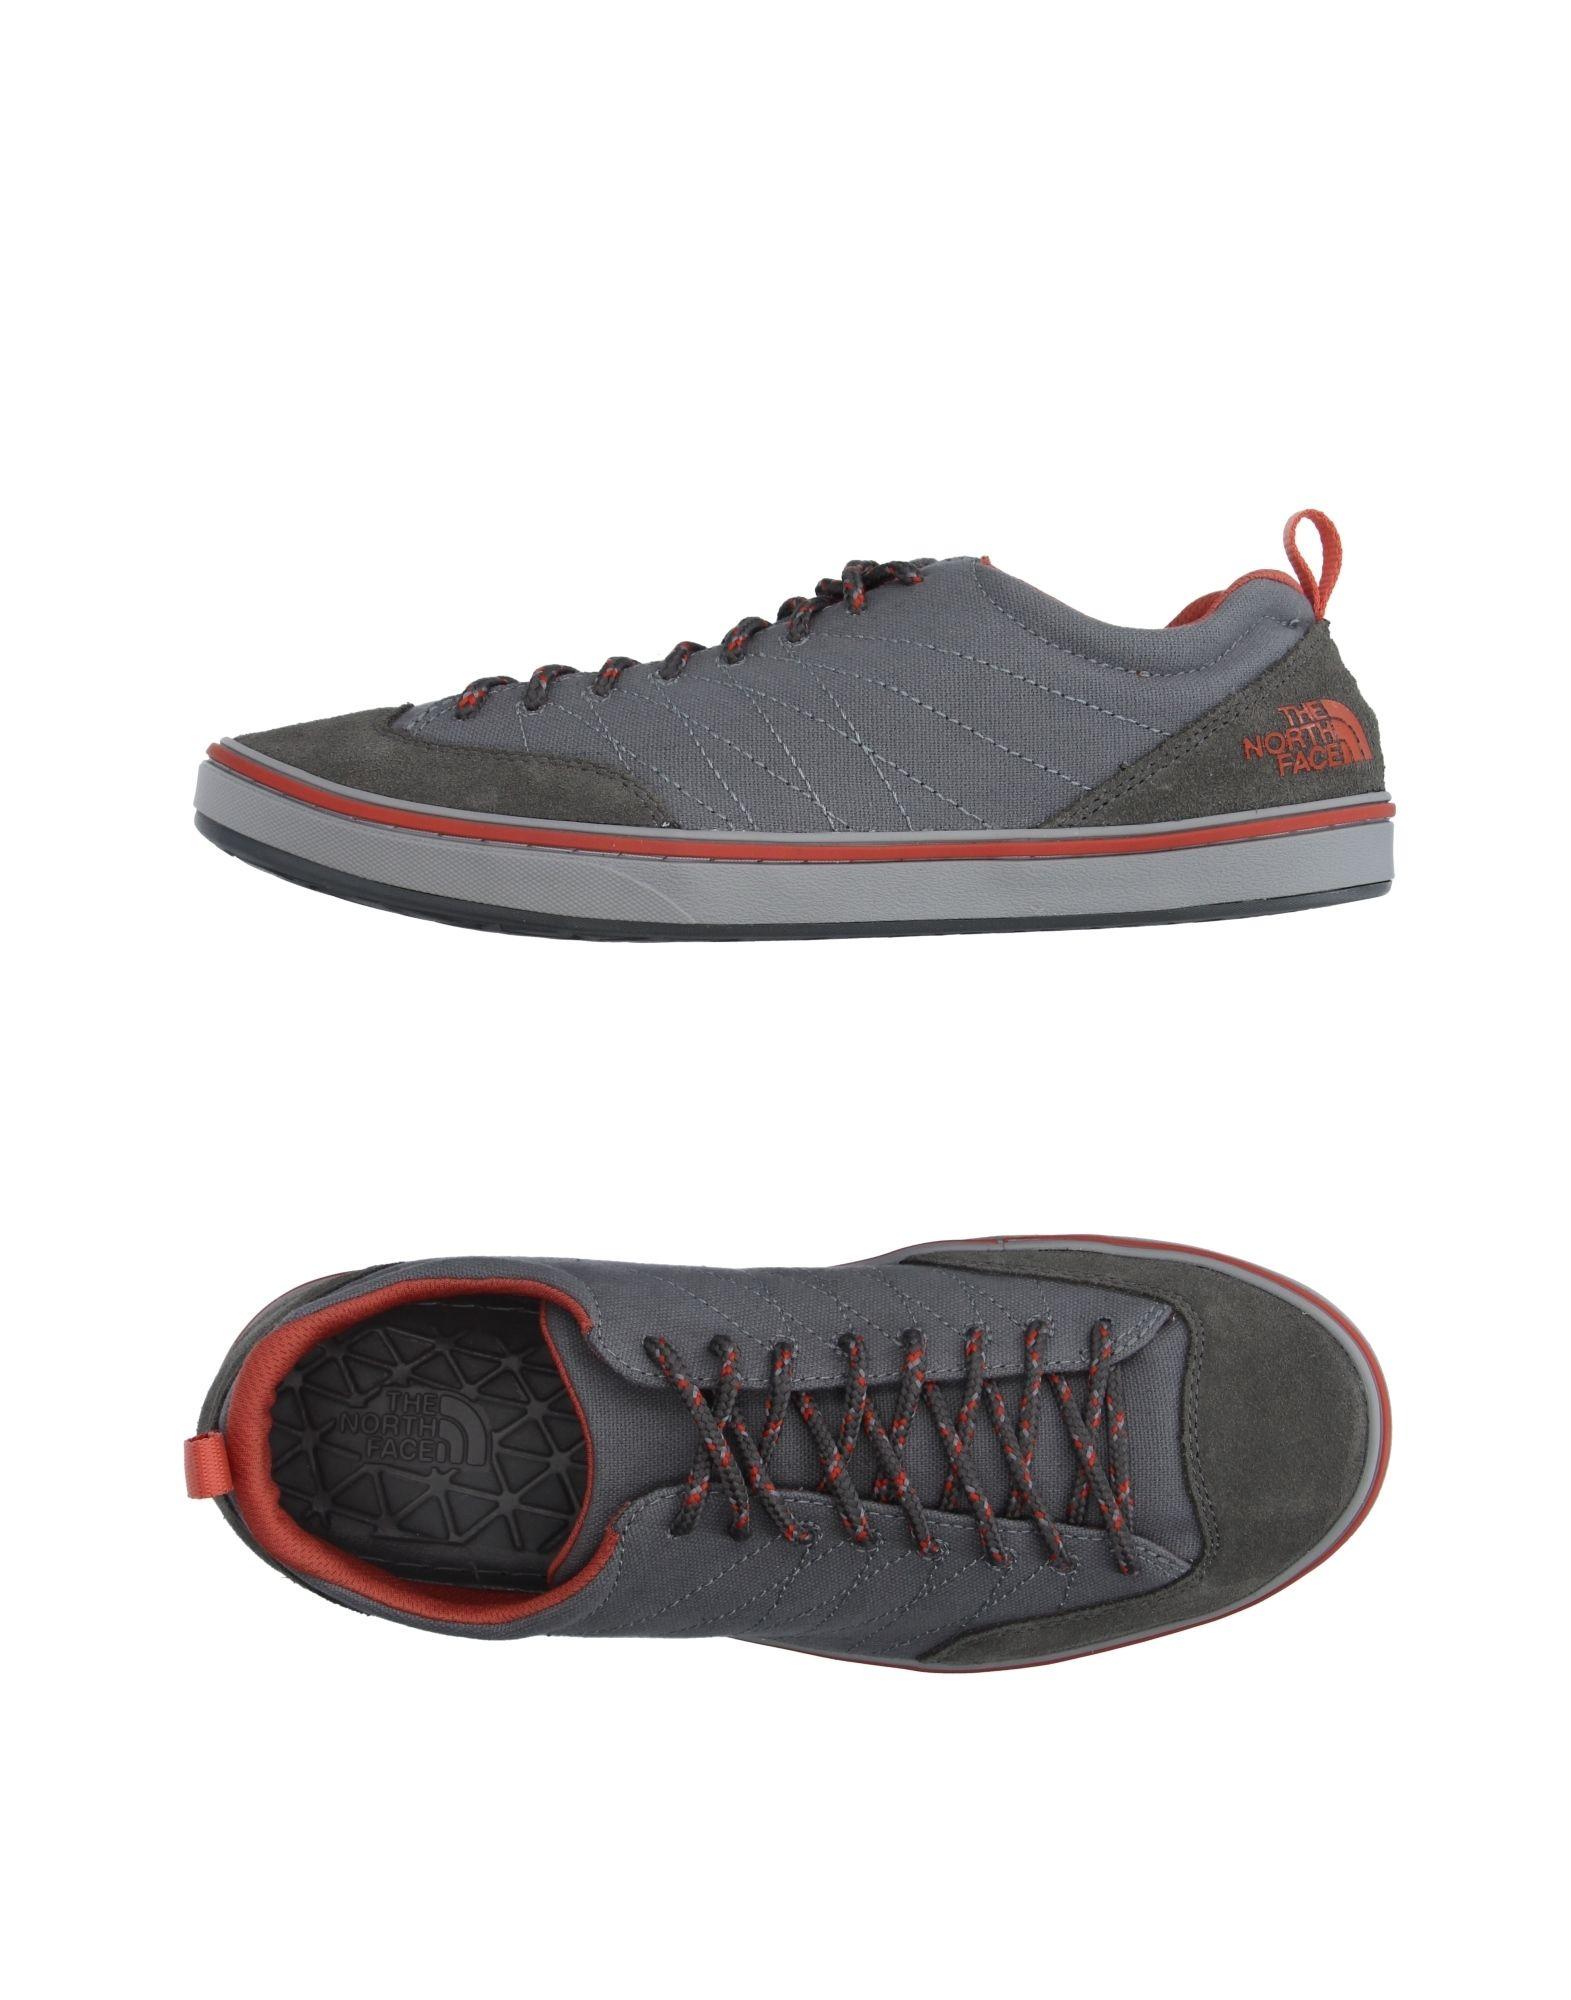 Lyst - The North Face Low-tops & Sneakers in Gray for Men